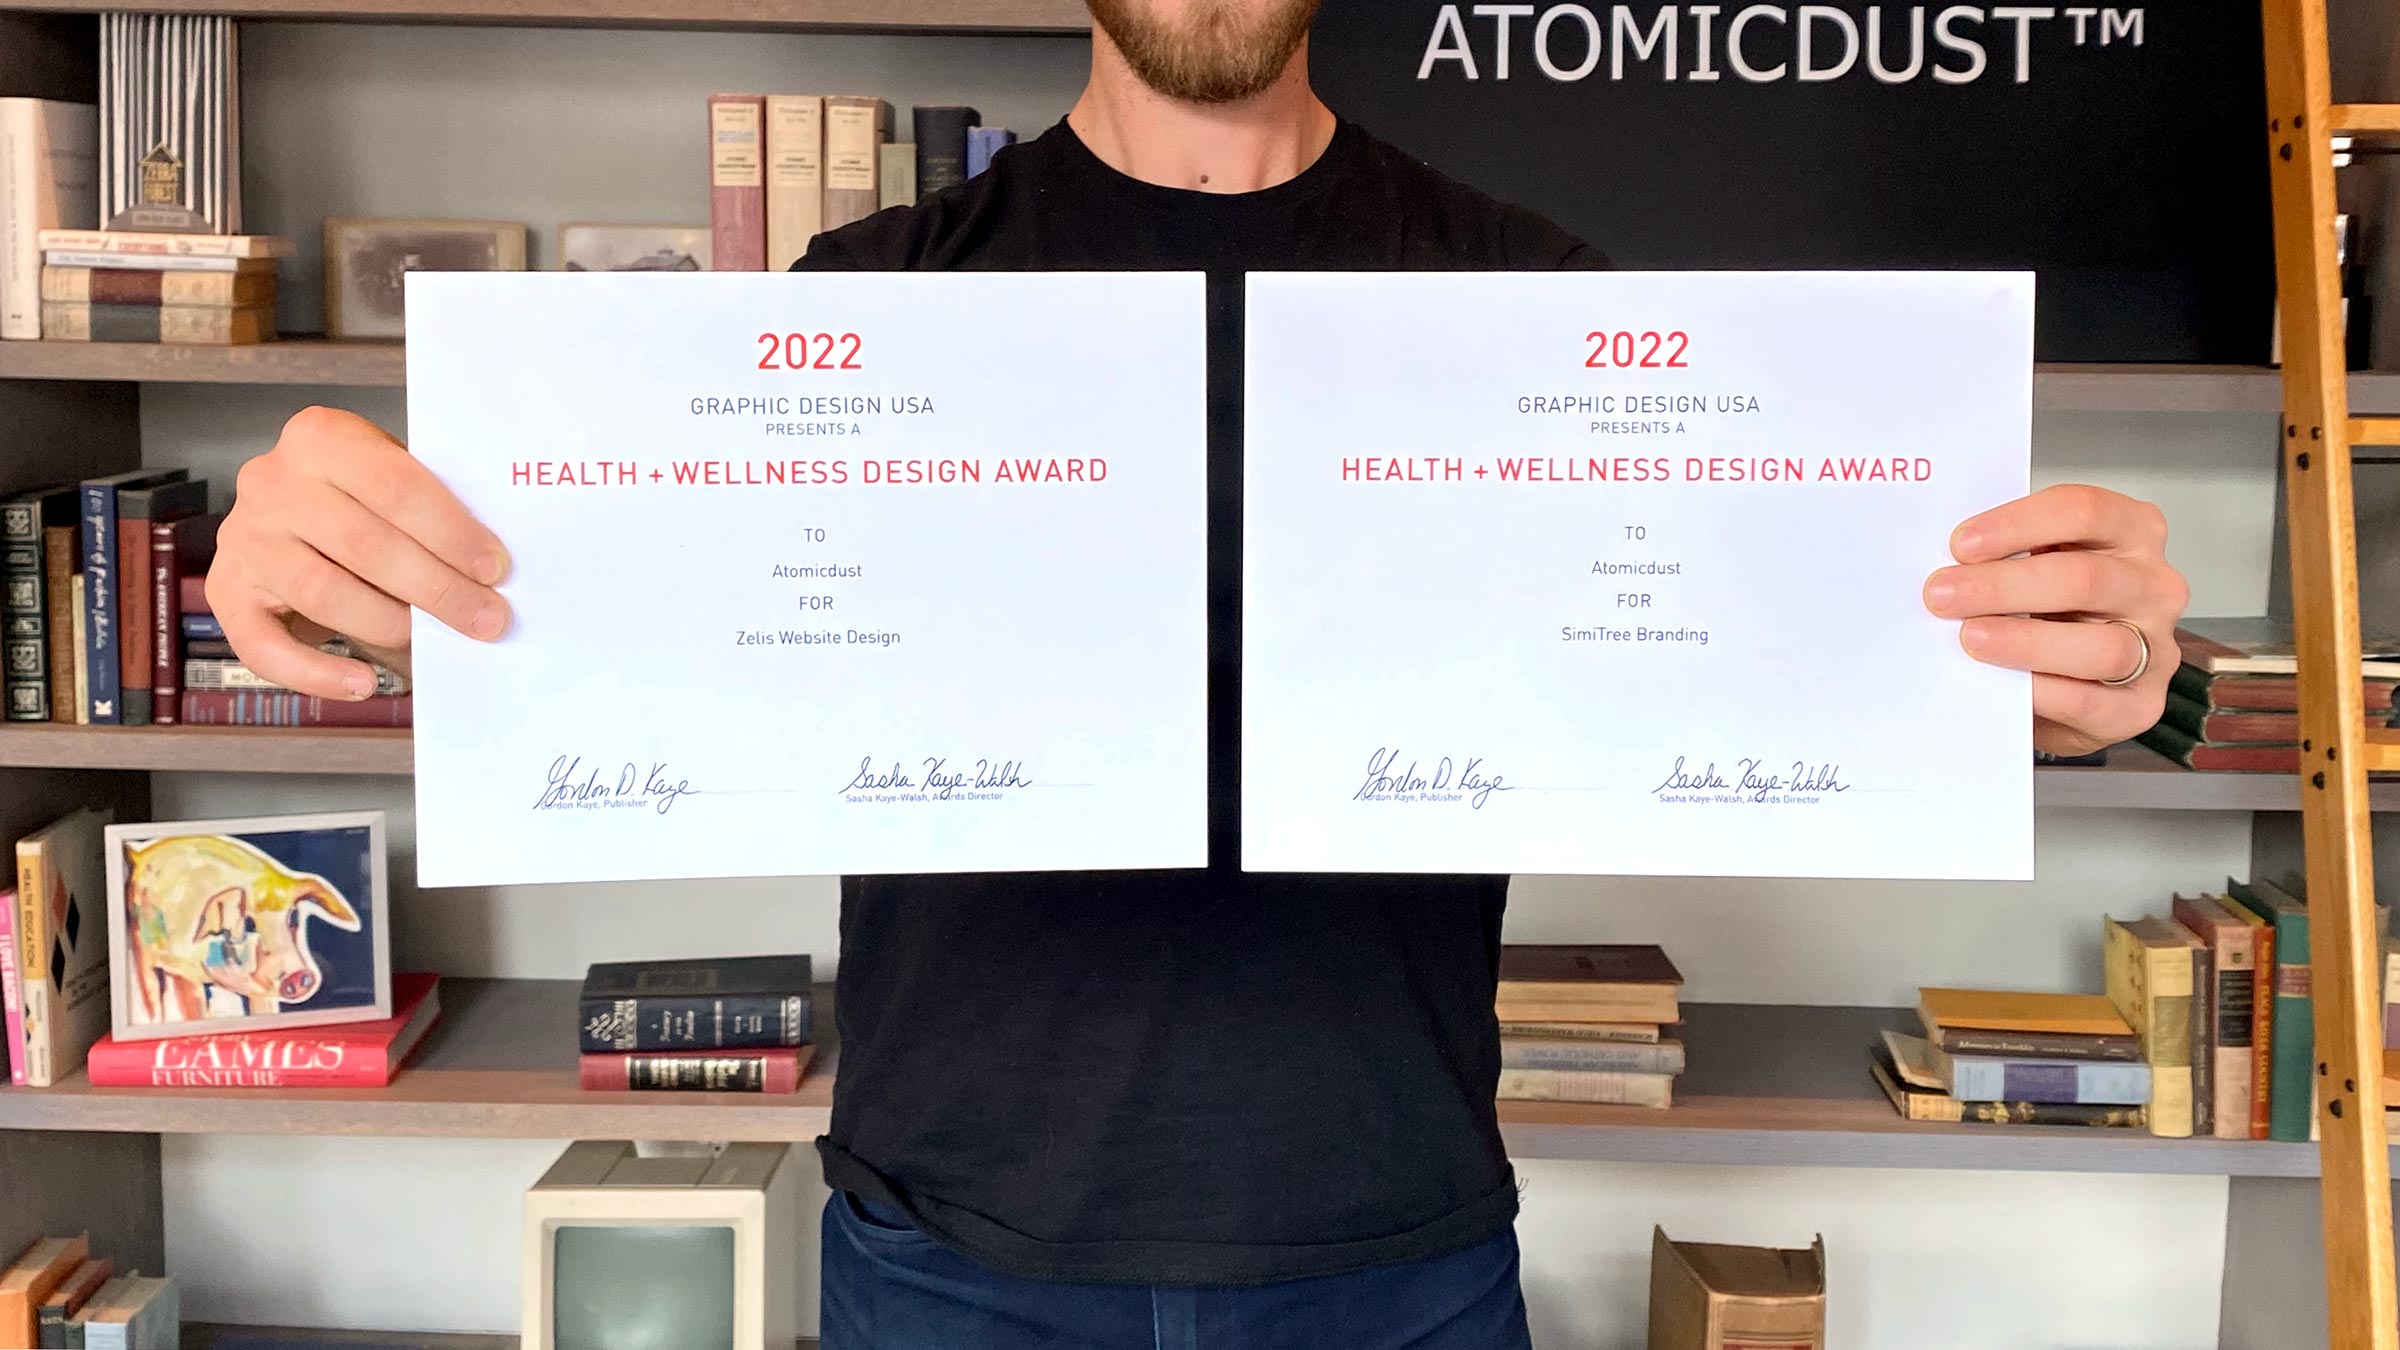 An Atomicdust team member holds two Graphic Design USA Health and Wellness 2022 winners certificates